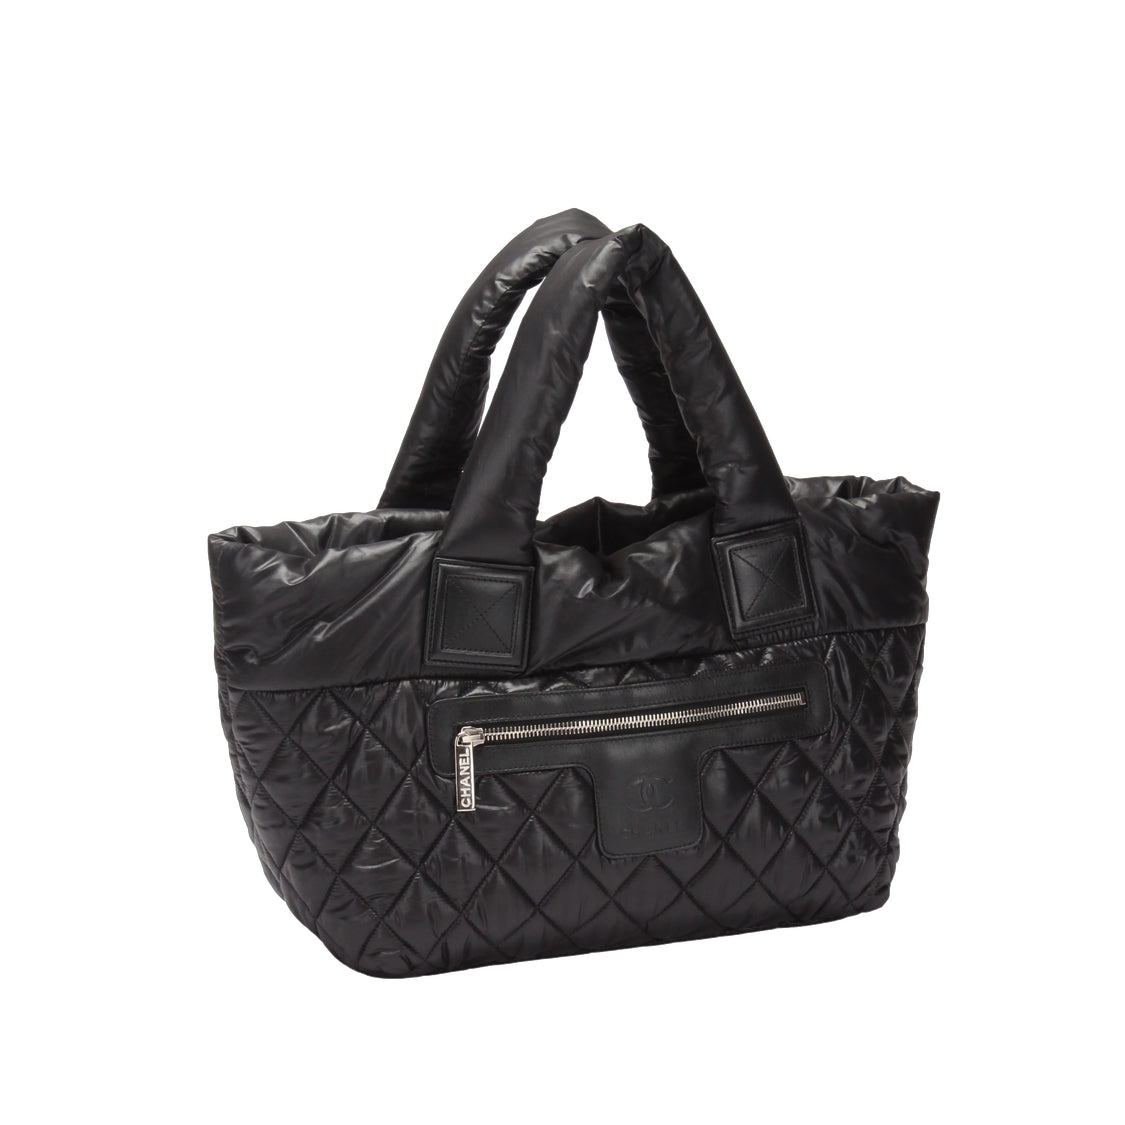 CC Cocoon Reversible Tote Bag